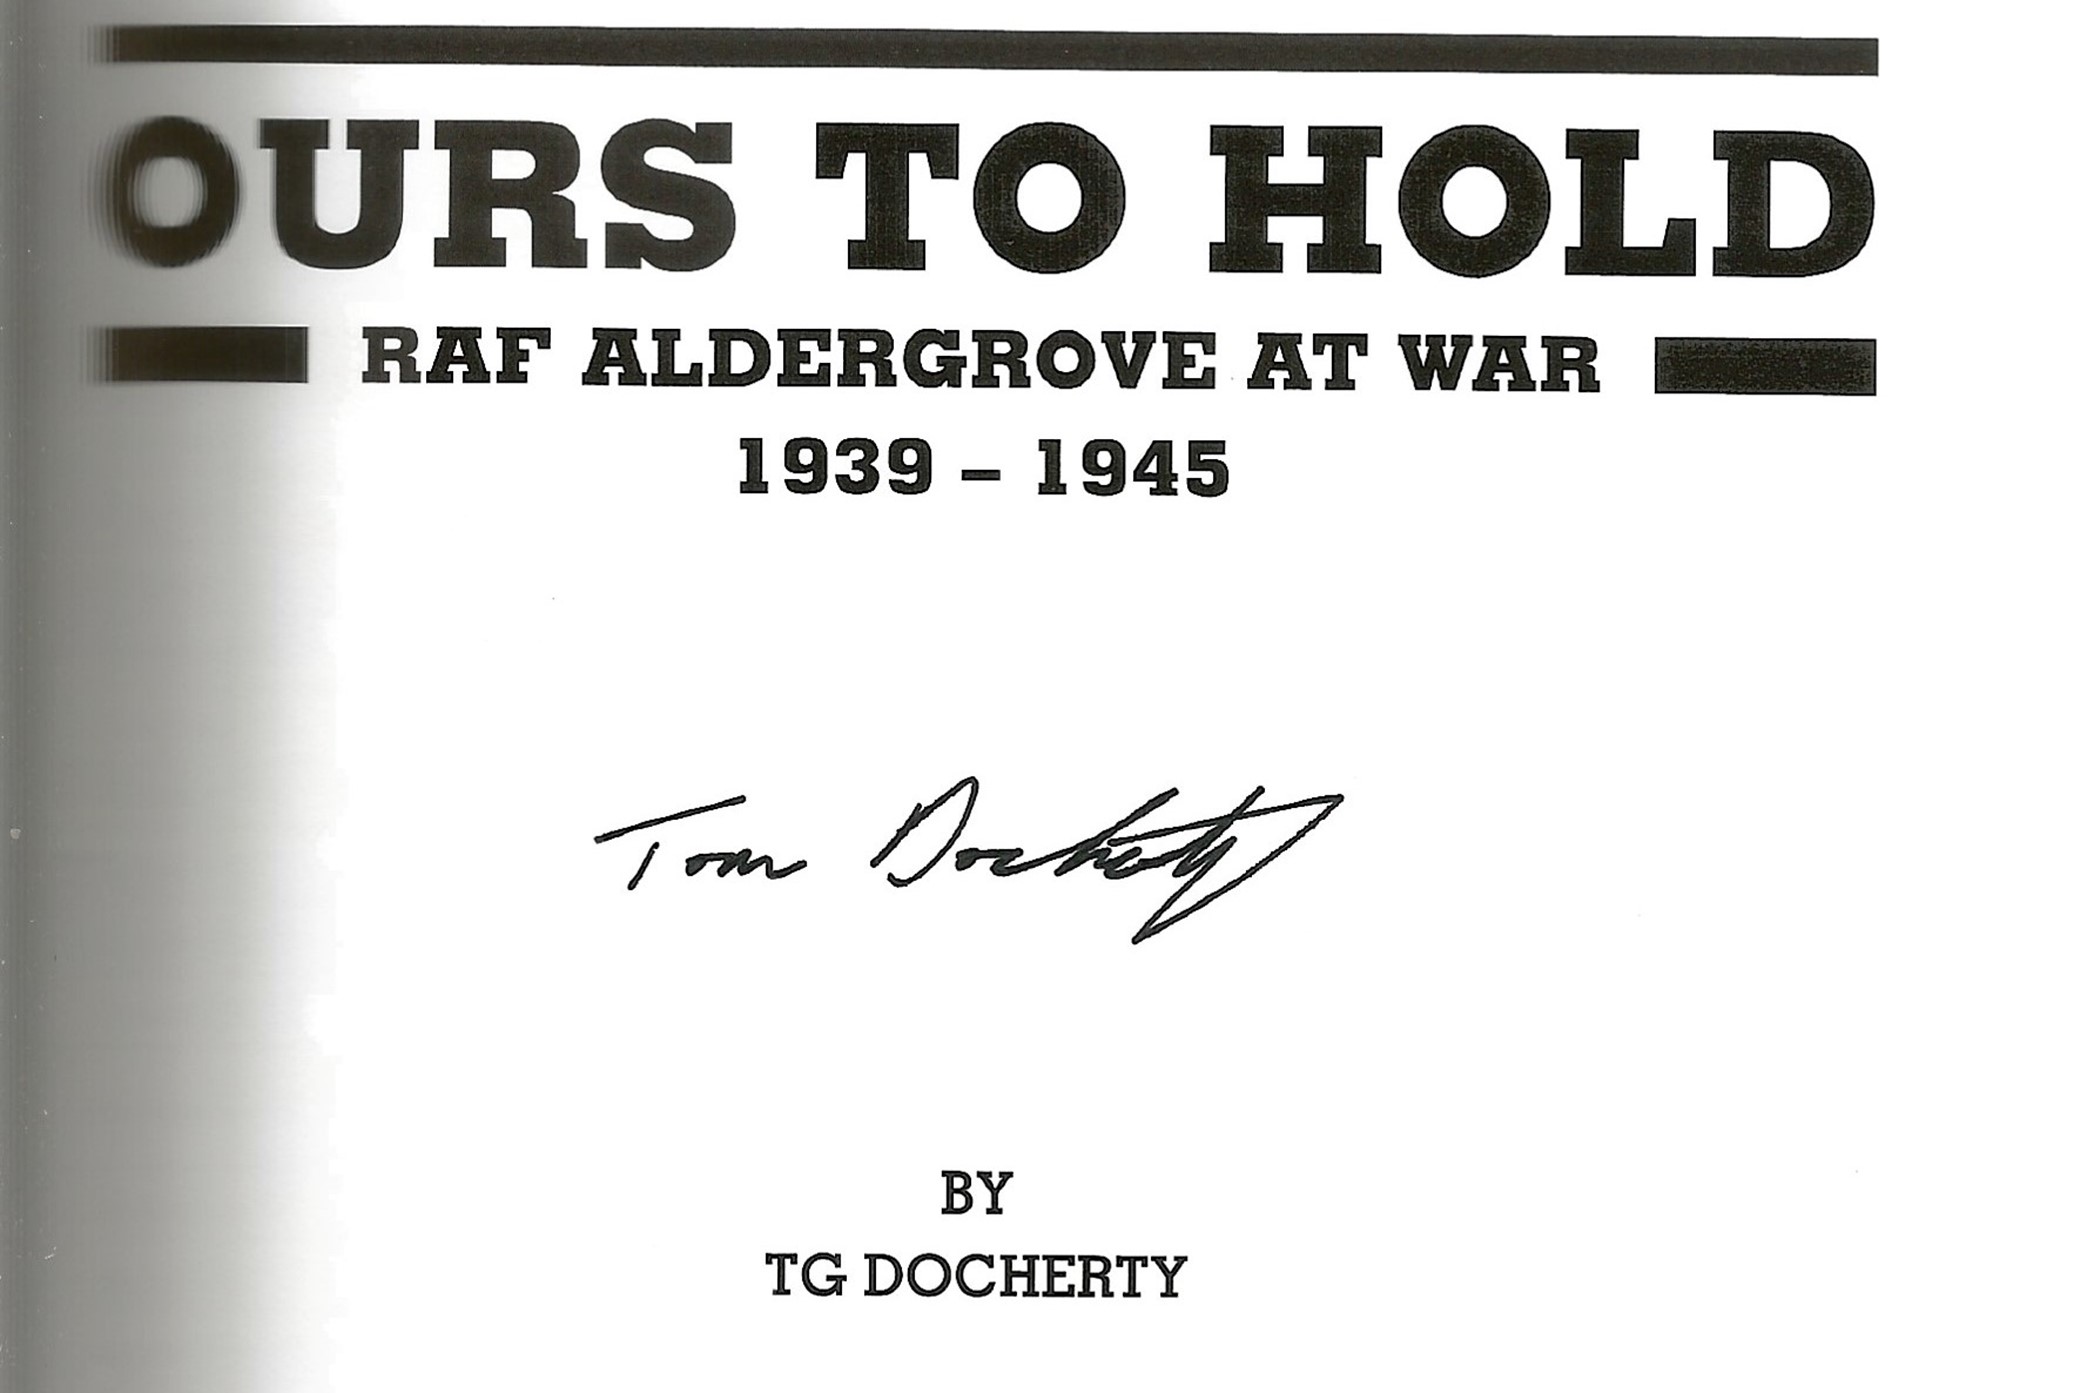 T G Docherty. Ours To Hold, RAF Aldergrove At War. First Edition WW2 hardback book in superb - Image 5 of 6